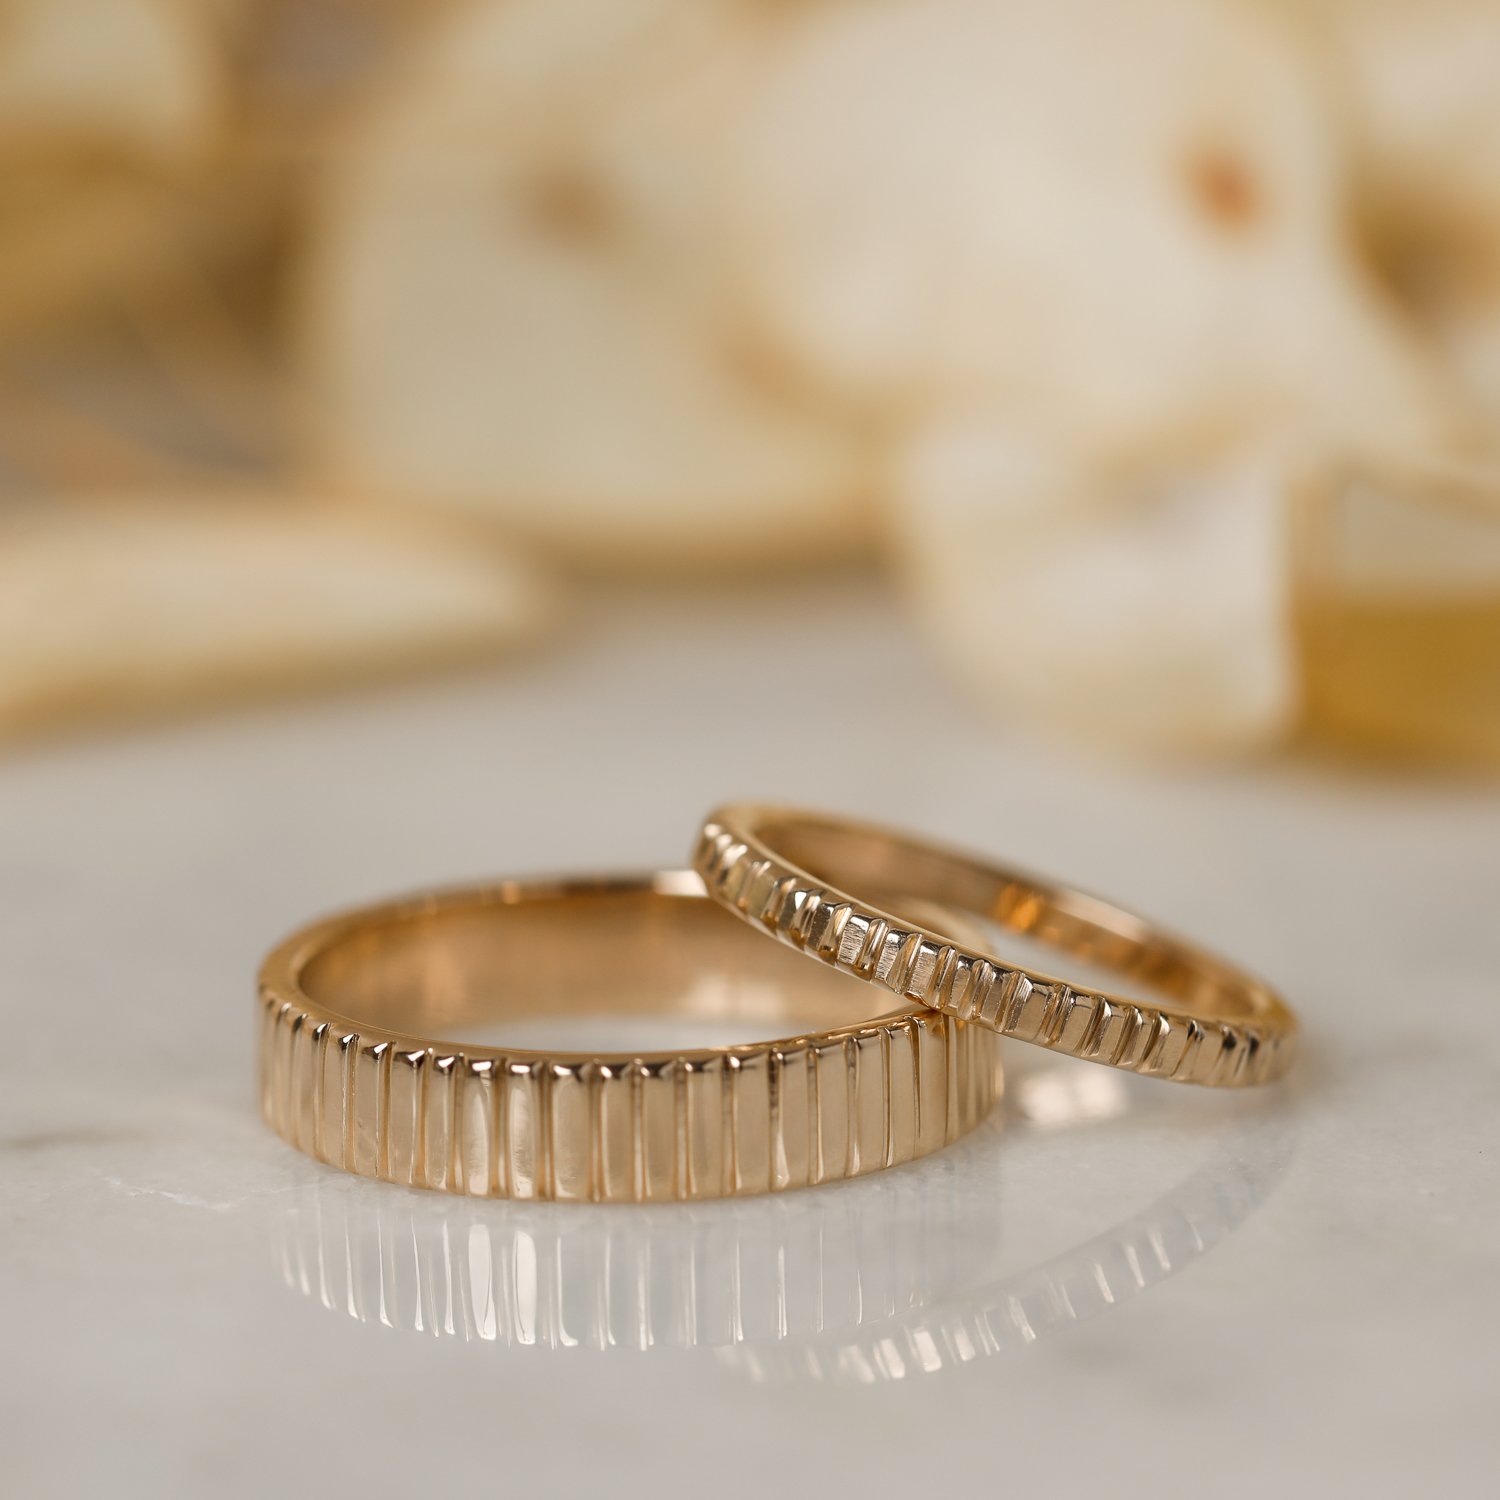 gold-striped-wedding-bands-styled.jpg